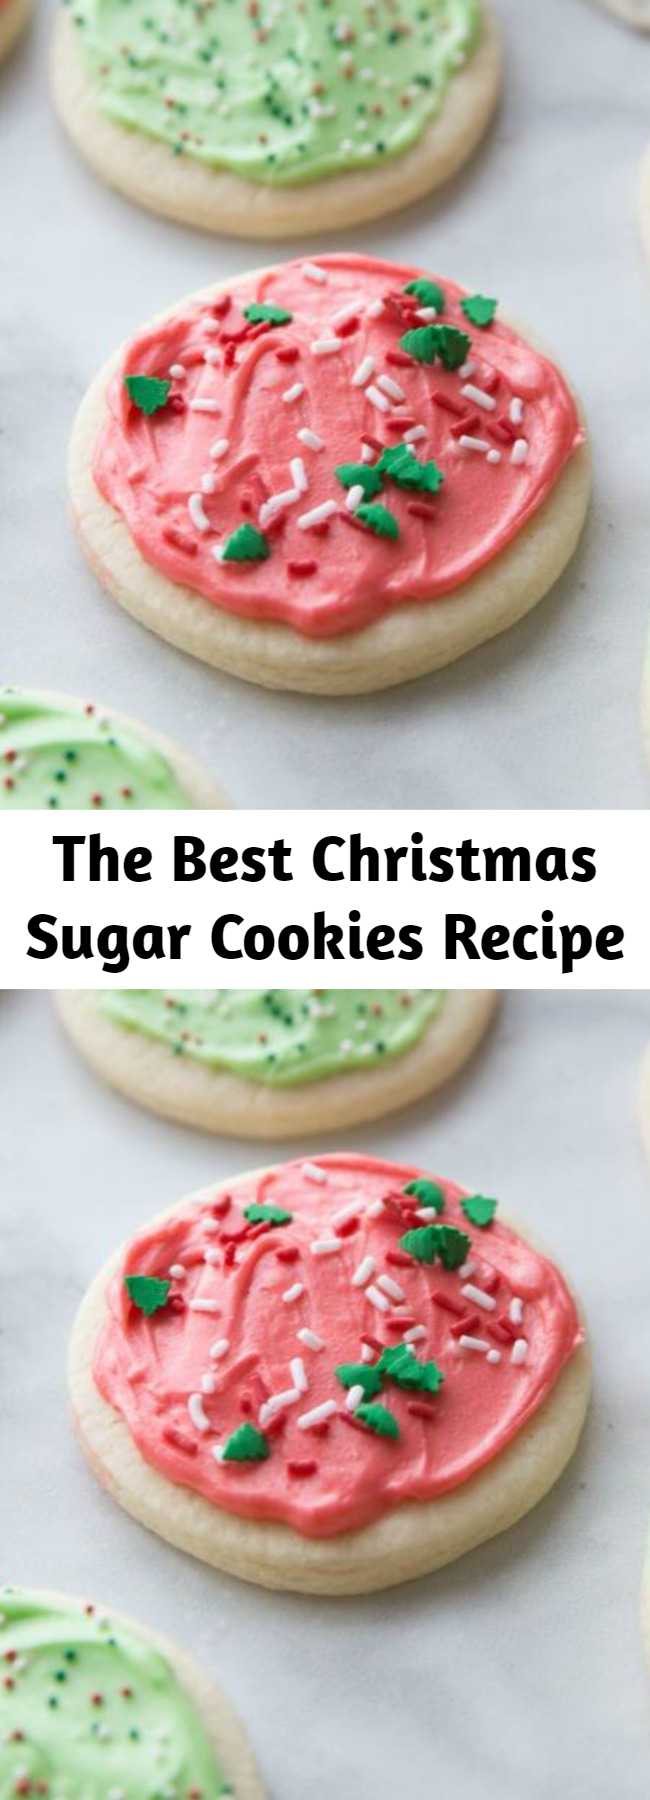 The Best Christmas Sugar Cookies Recipe - The Best Christmas Cookies for the holidays! Easy Sugar Cookies that everyone will LOVE! You have a melt in your mouth sugar cookies that are festive and fit into the holiday season. Soft cut out sugar cookies that require no chilling of the dough! This soft sugar cookie recipe will be a perfect fit to your baking needs this holiday season. #cookies #christmas #cookierecipe #cookieideas #christmascookies #snacks #treats